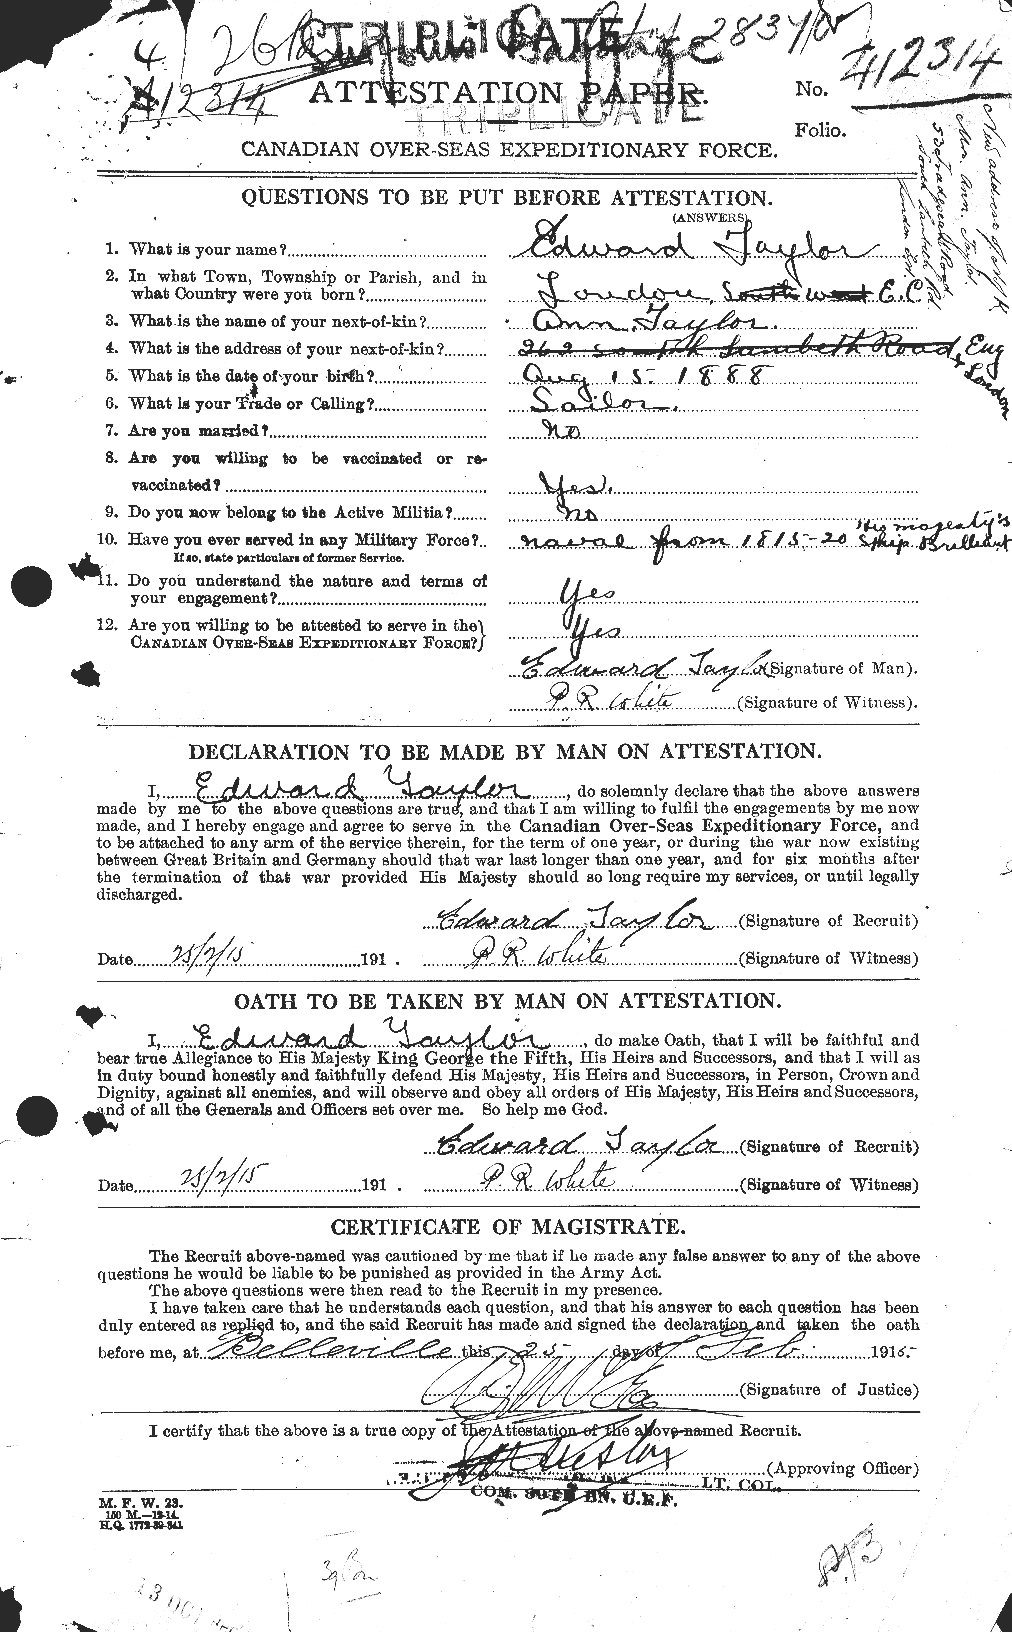 Personnel Records of the First World War - CEF 627296a